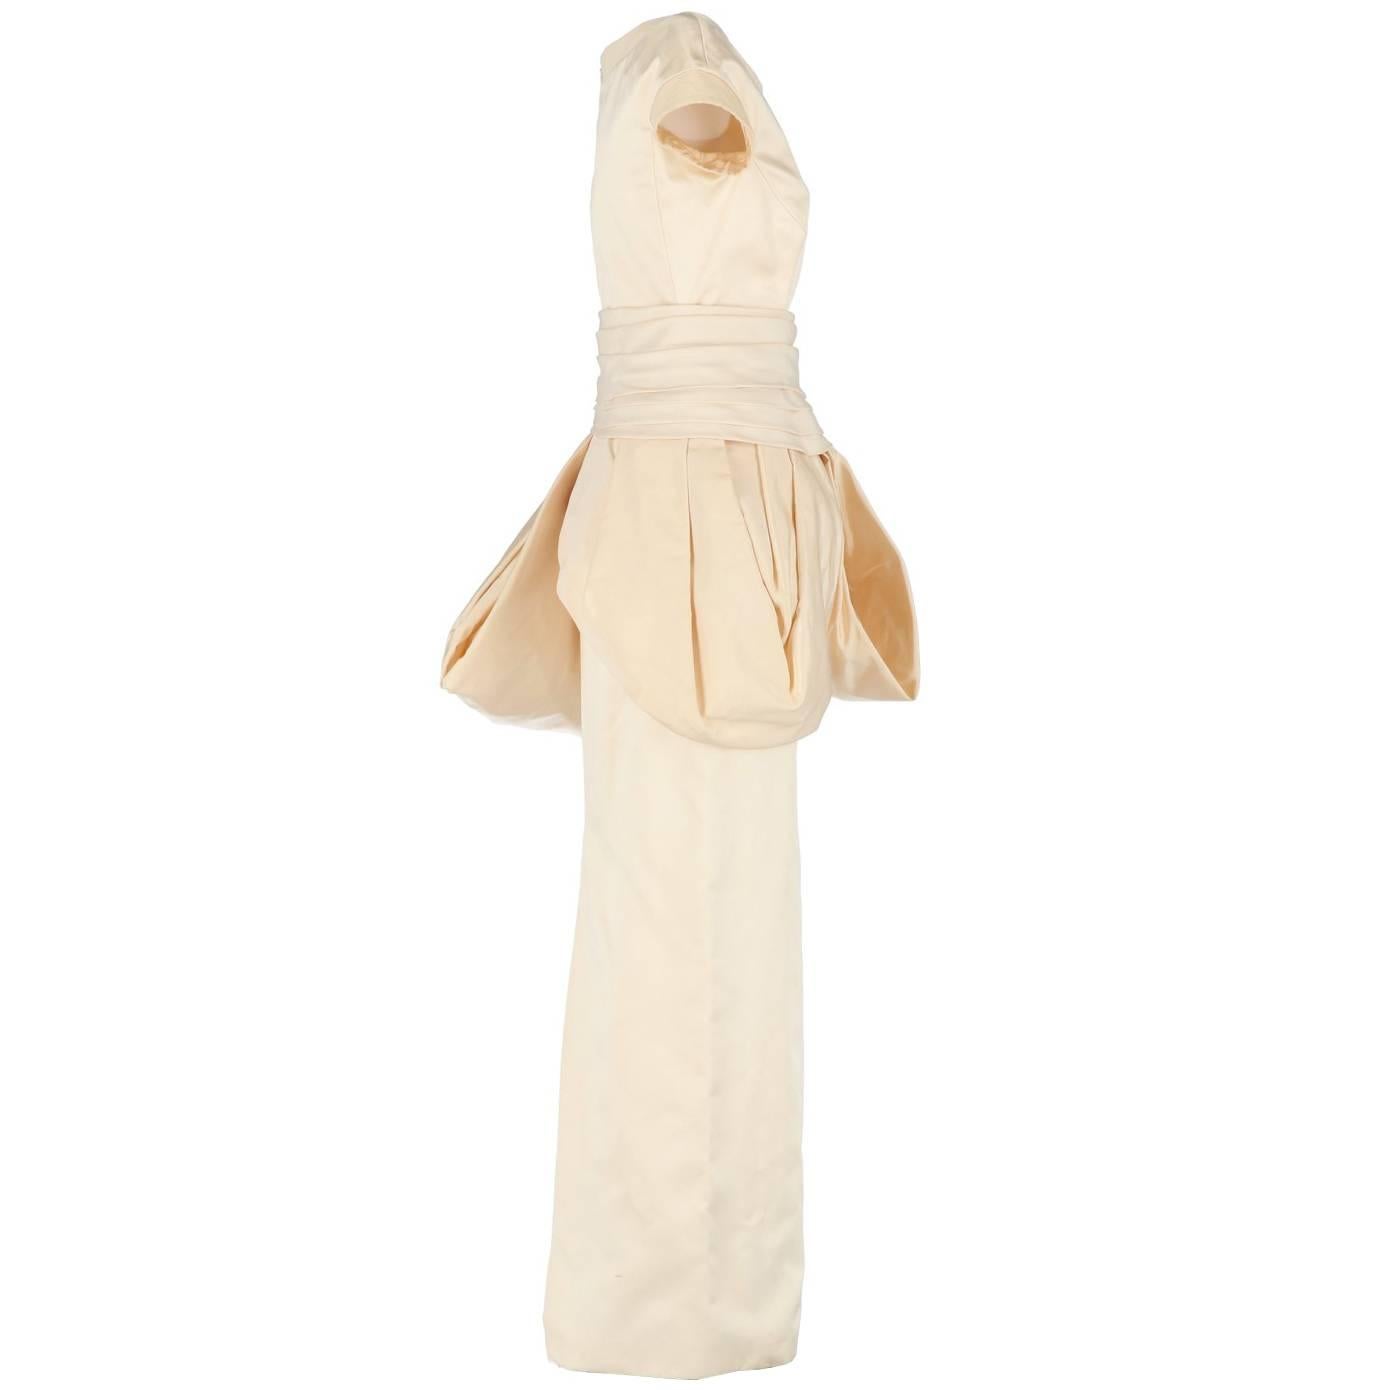 Beautiful Gianni Versace wedding dresses in a pale blush pink shantung fabric, with a draped waistband, straight-cut skirt with a rip on the back and a ballon insert over the skirt. The item is vintage, it was produced in the 90s and is in excellent